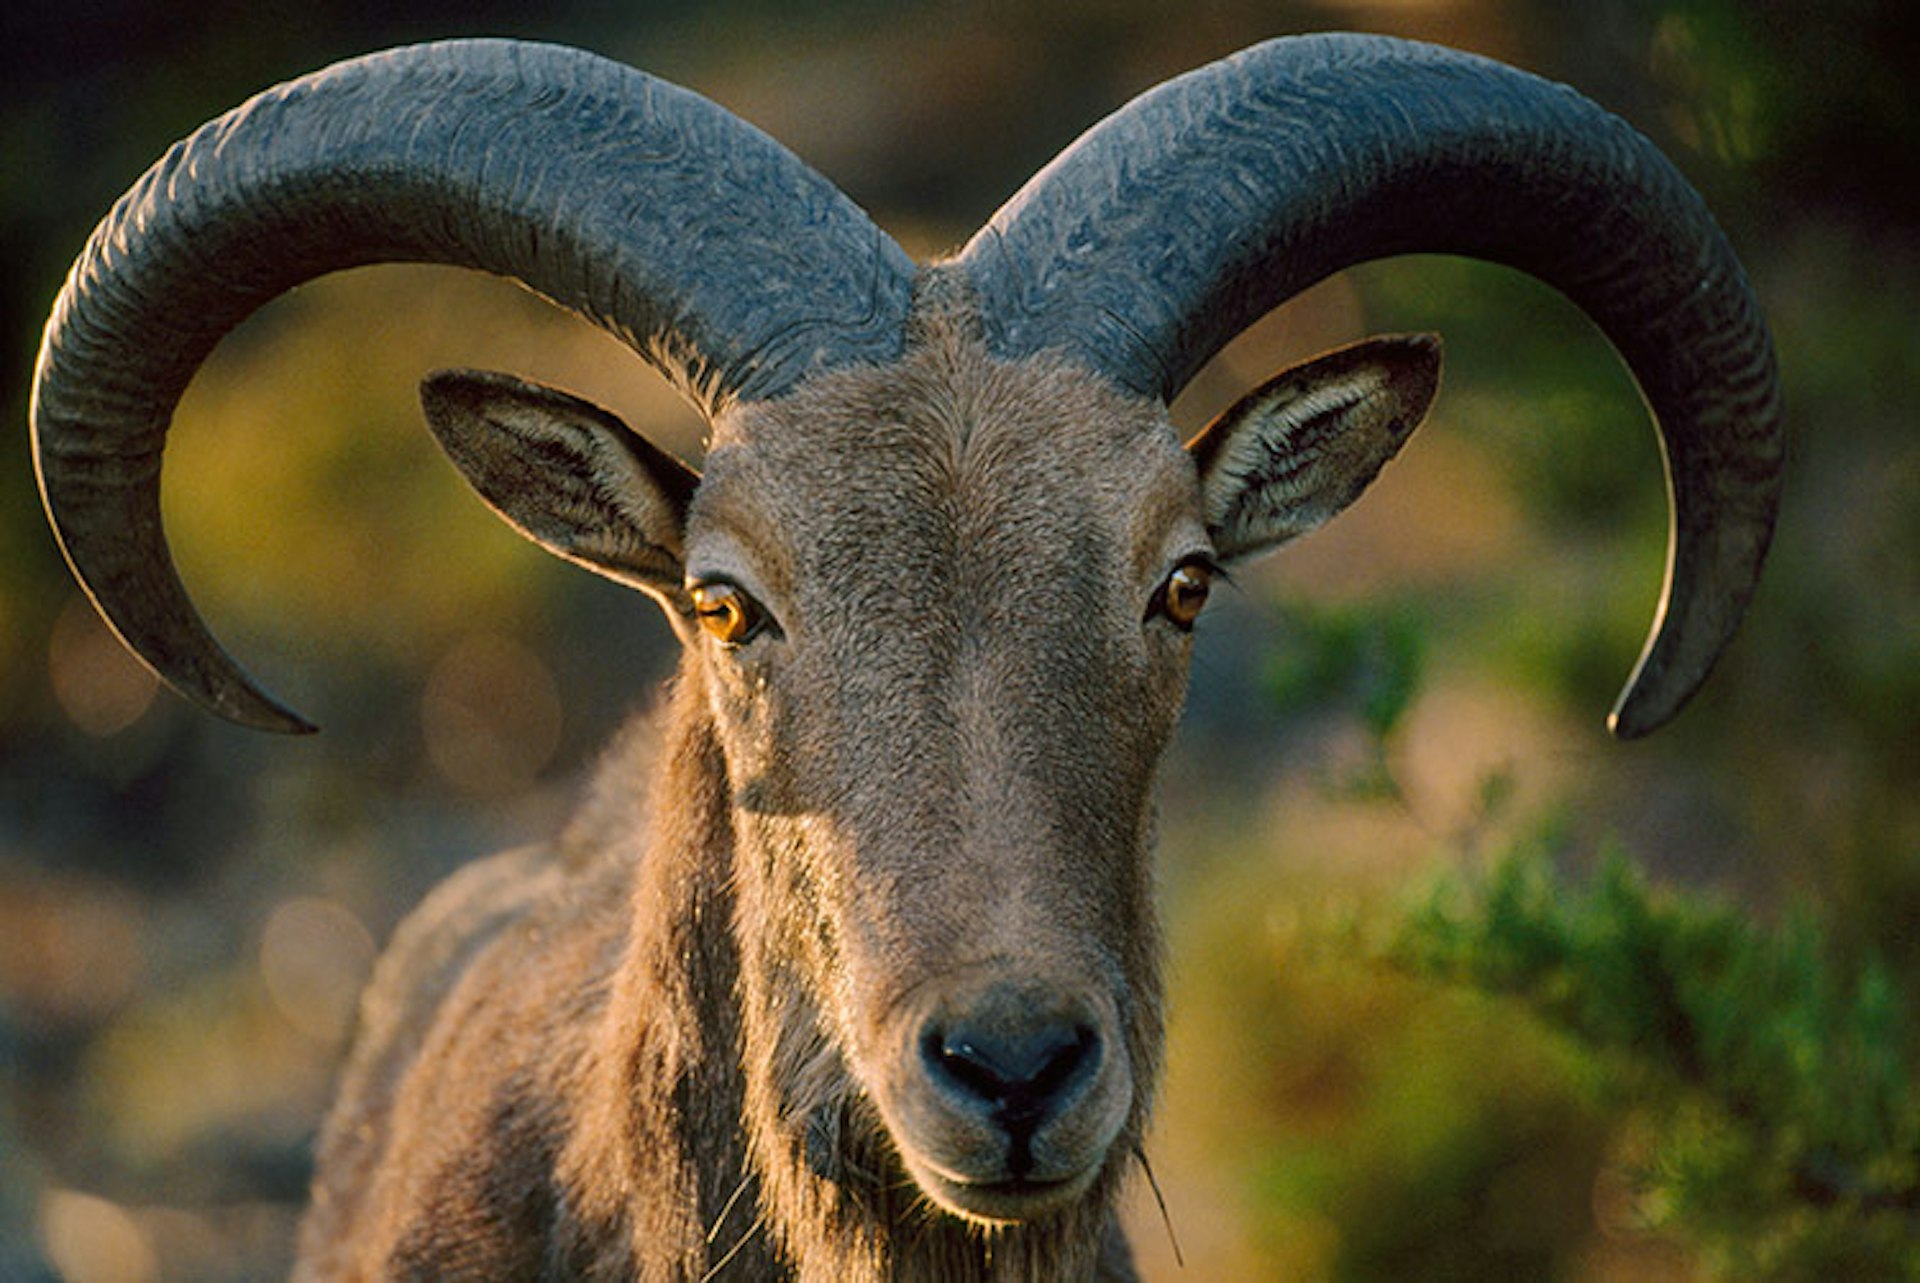 Don't find yourself on the wrong side of these horns, Morocco's aoudad sheep is as hardy is it looks. Image by Frans Lanting / Getty Images